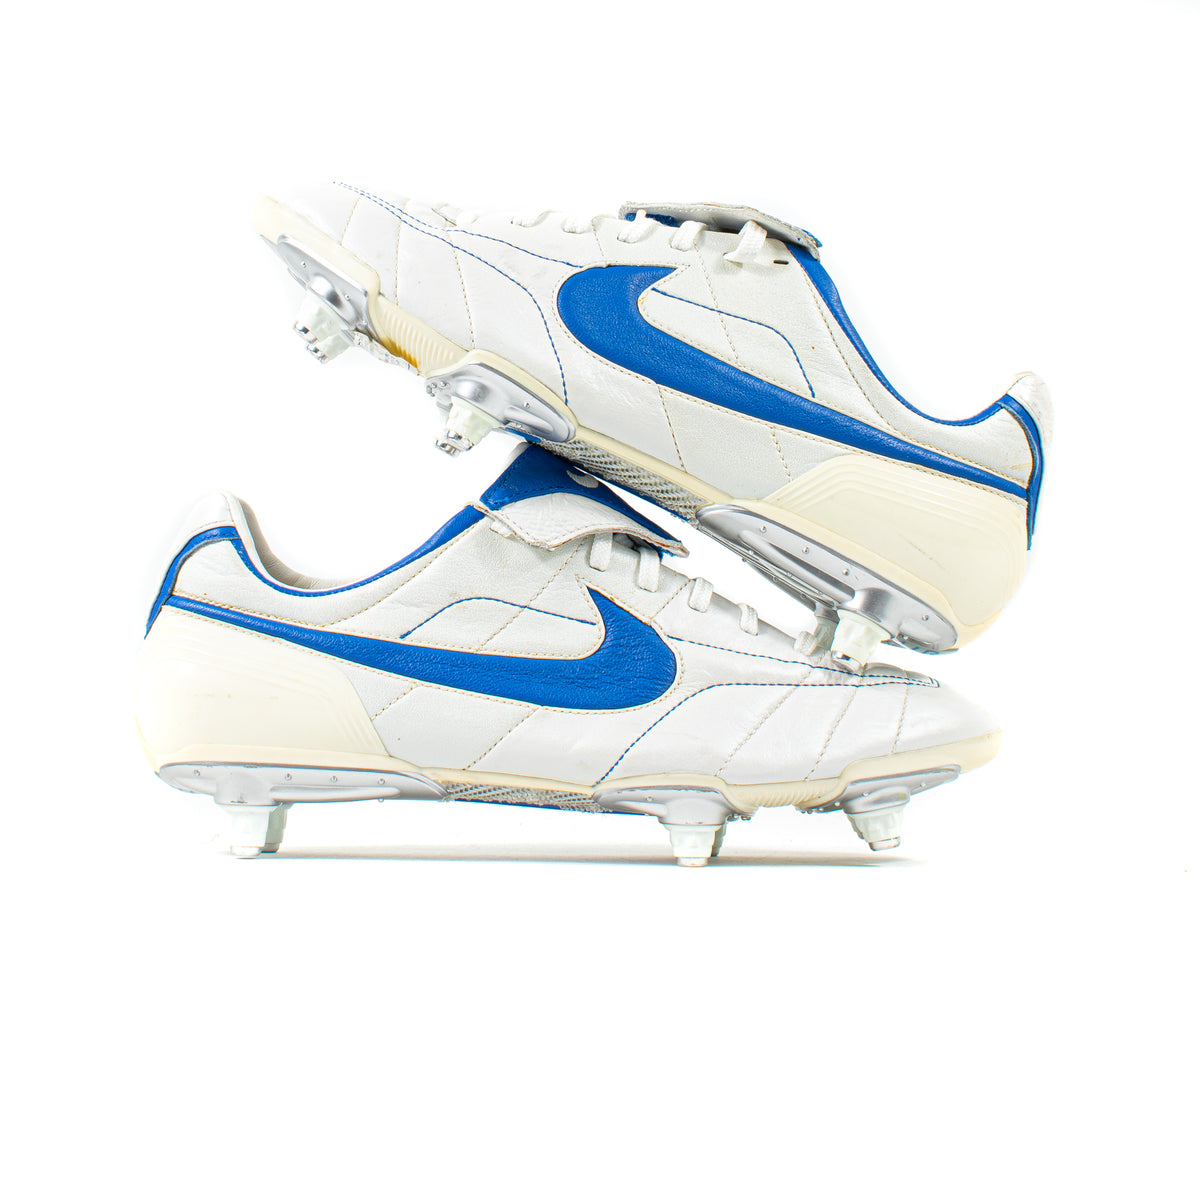 siete y media mil millones Continente Nike Tiempo Air Legend OG White Blue SG – Classic Soccer Cleats